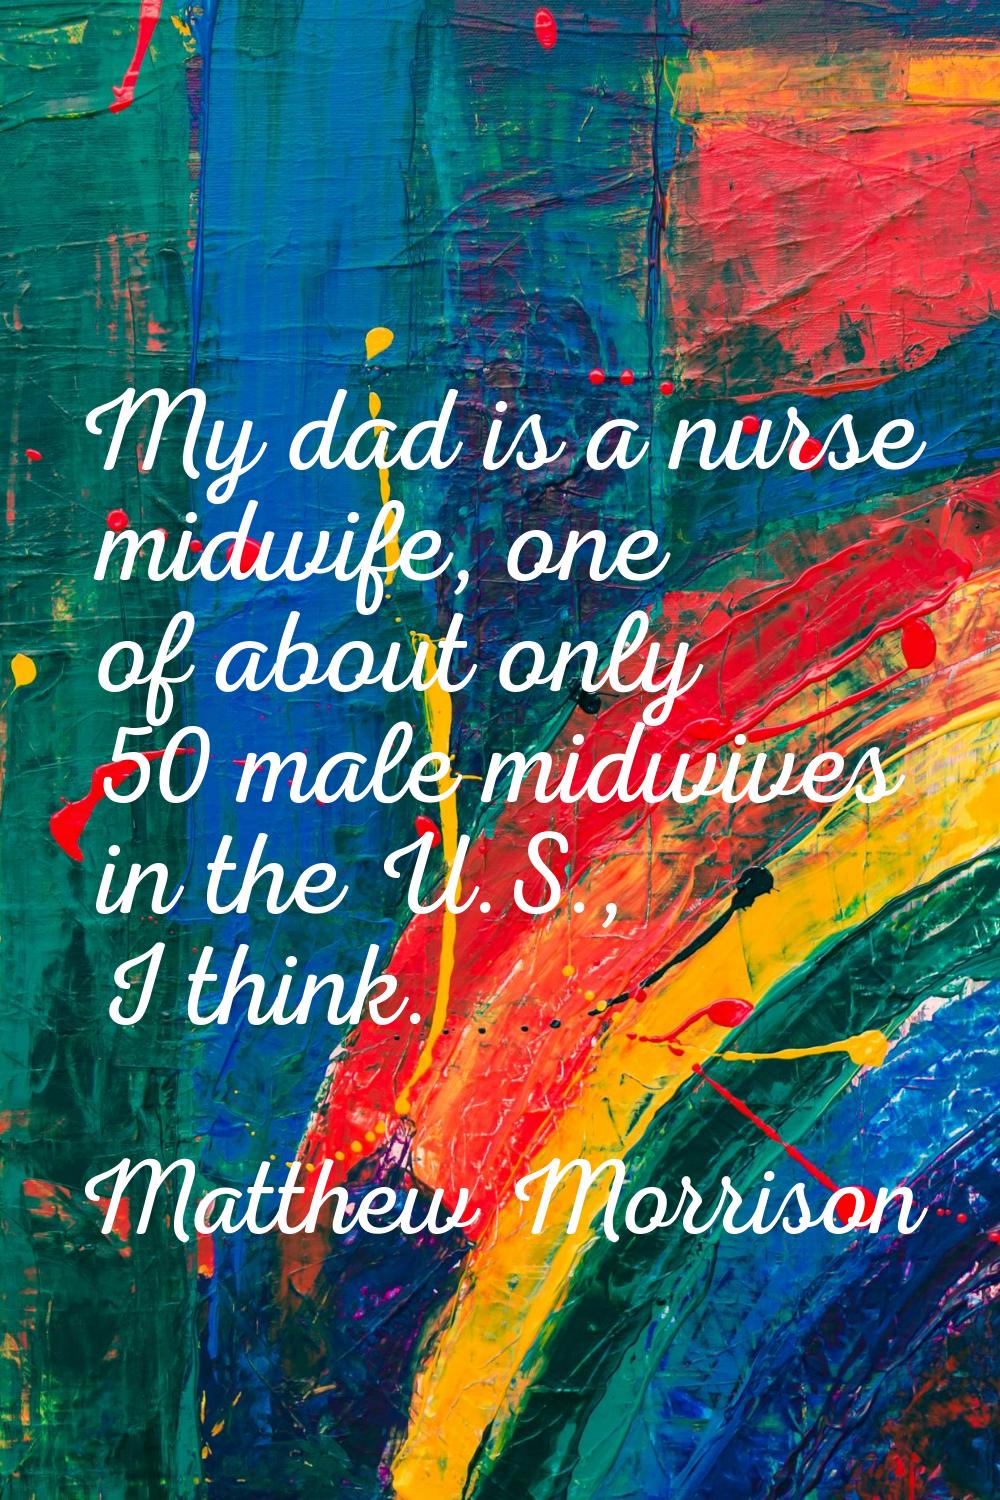 My dad is a nurse midwife, one of about only 50 male midwives in the U.S., I think.